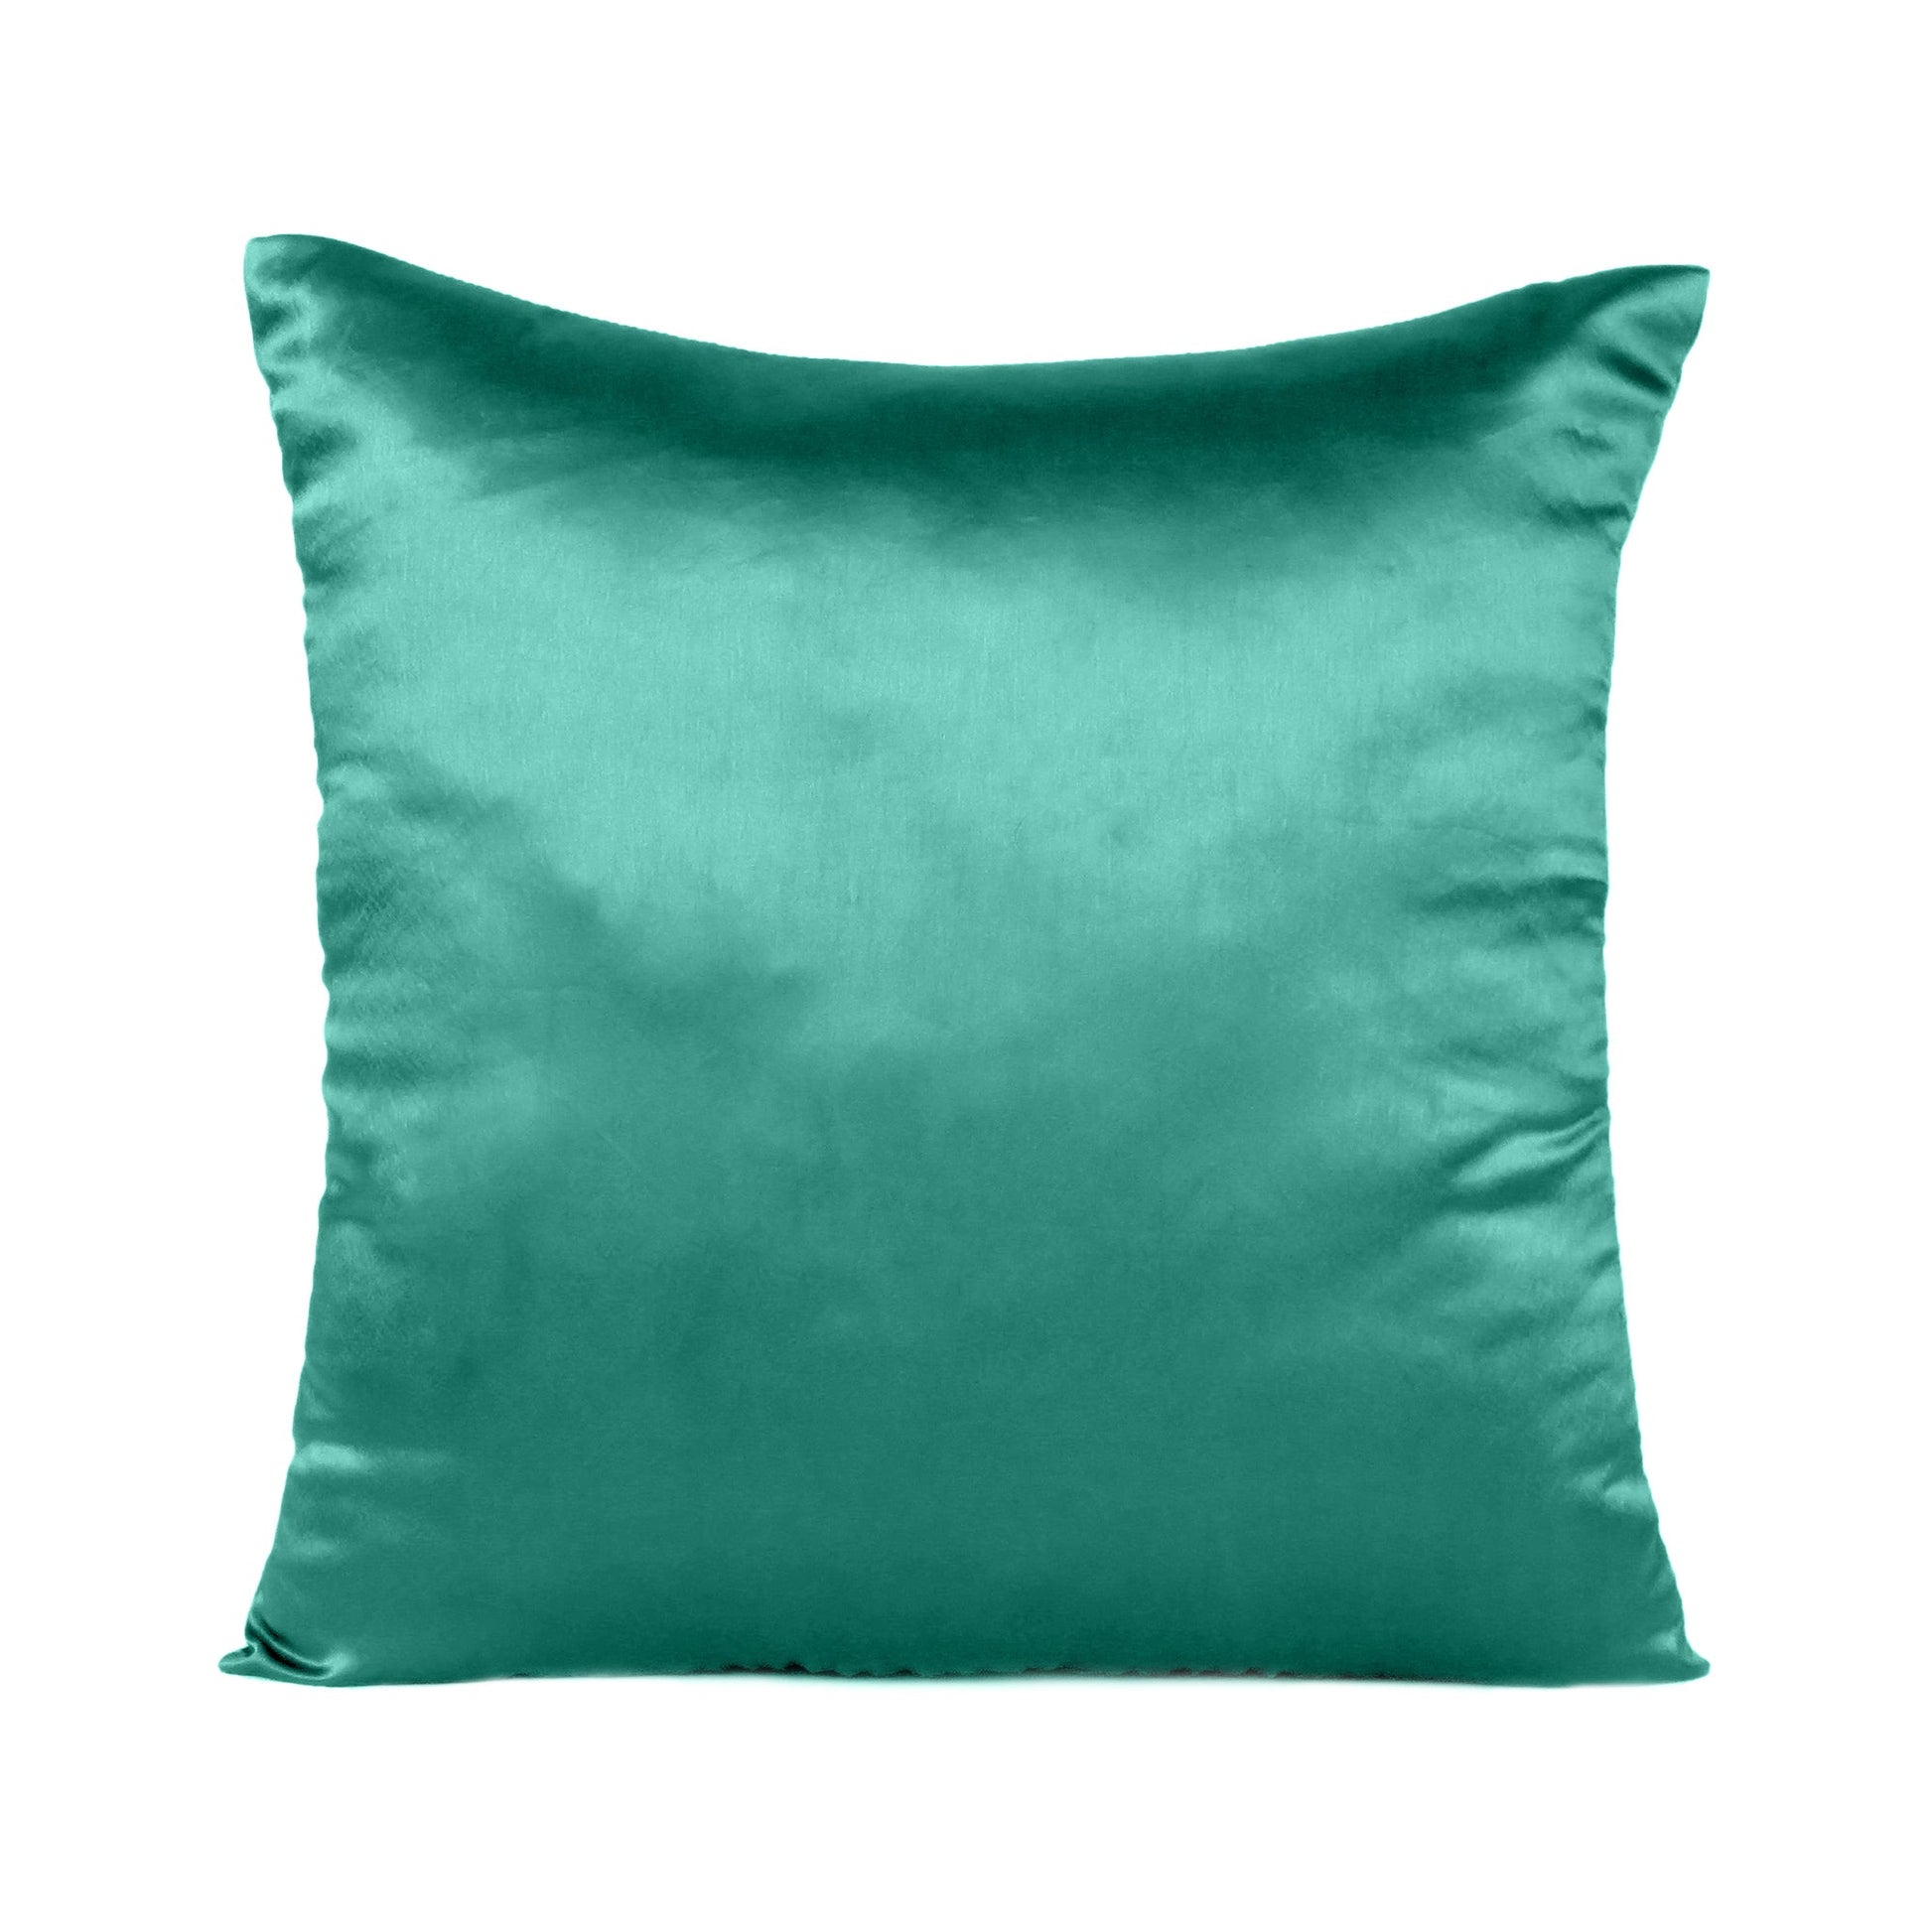 Bayberry Green Satin Silky Cushion Covers in Set of 2